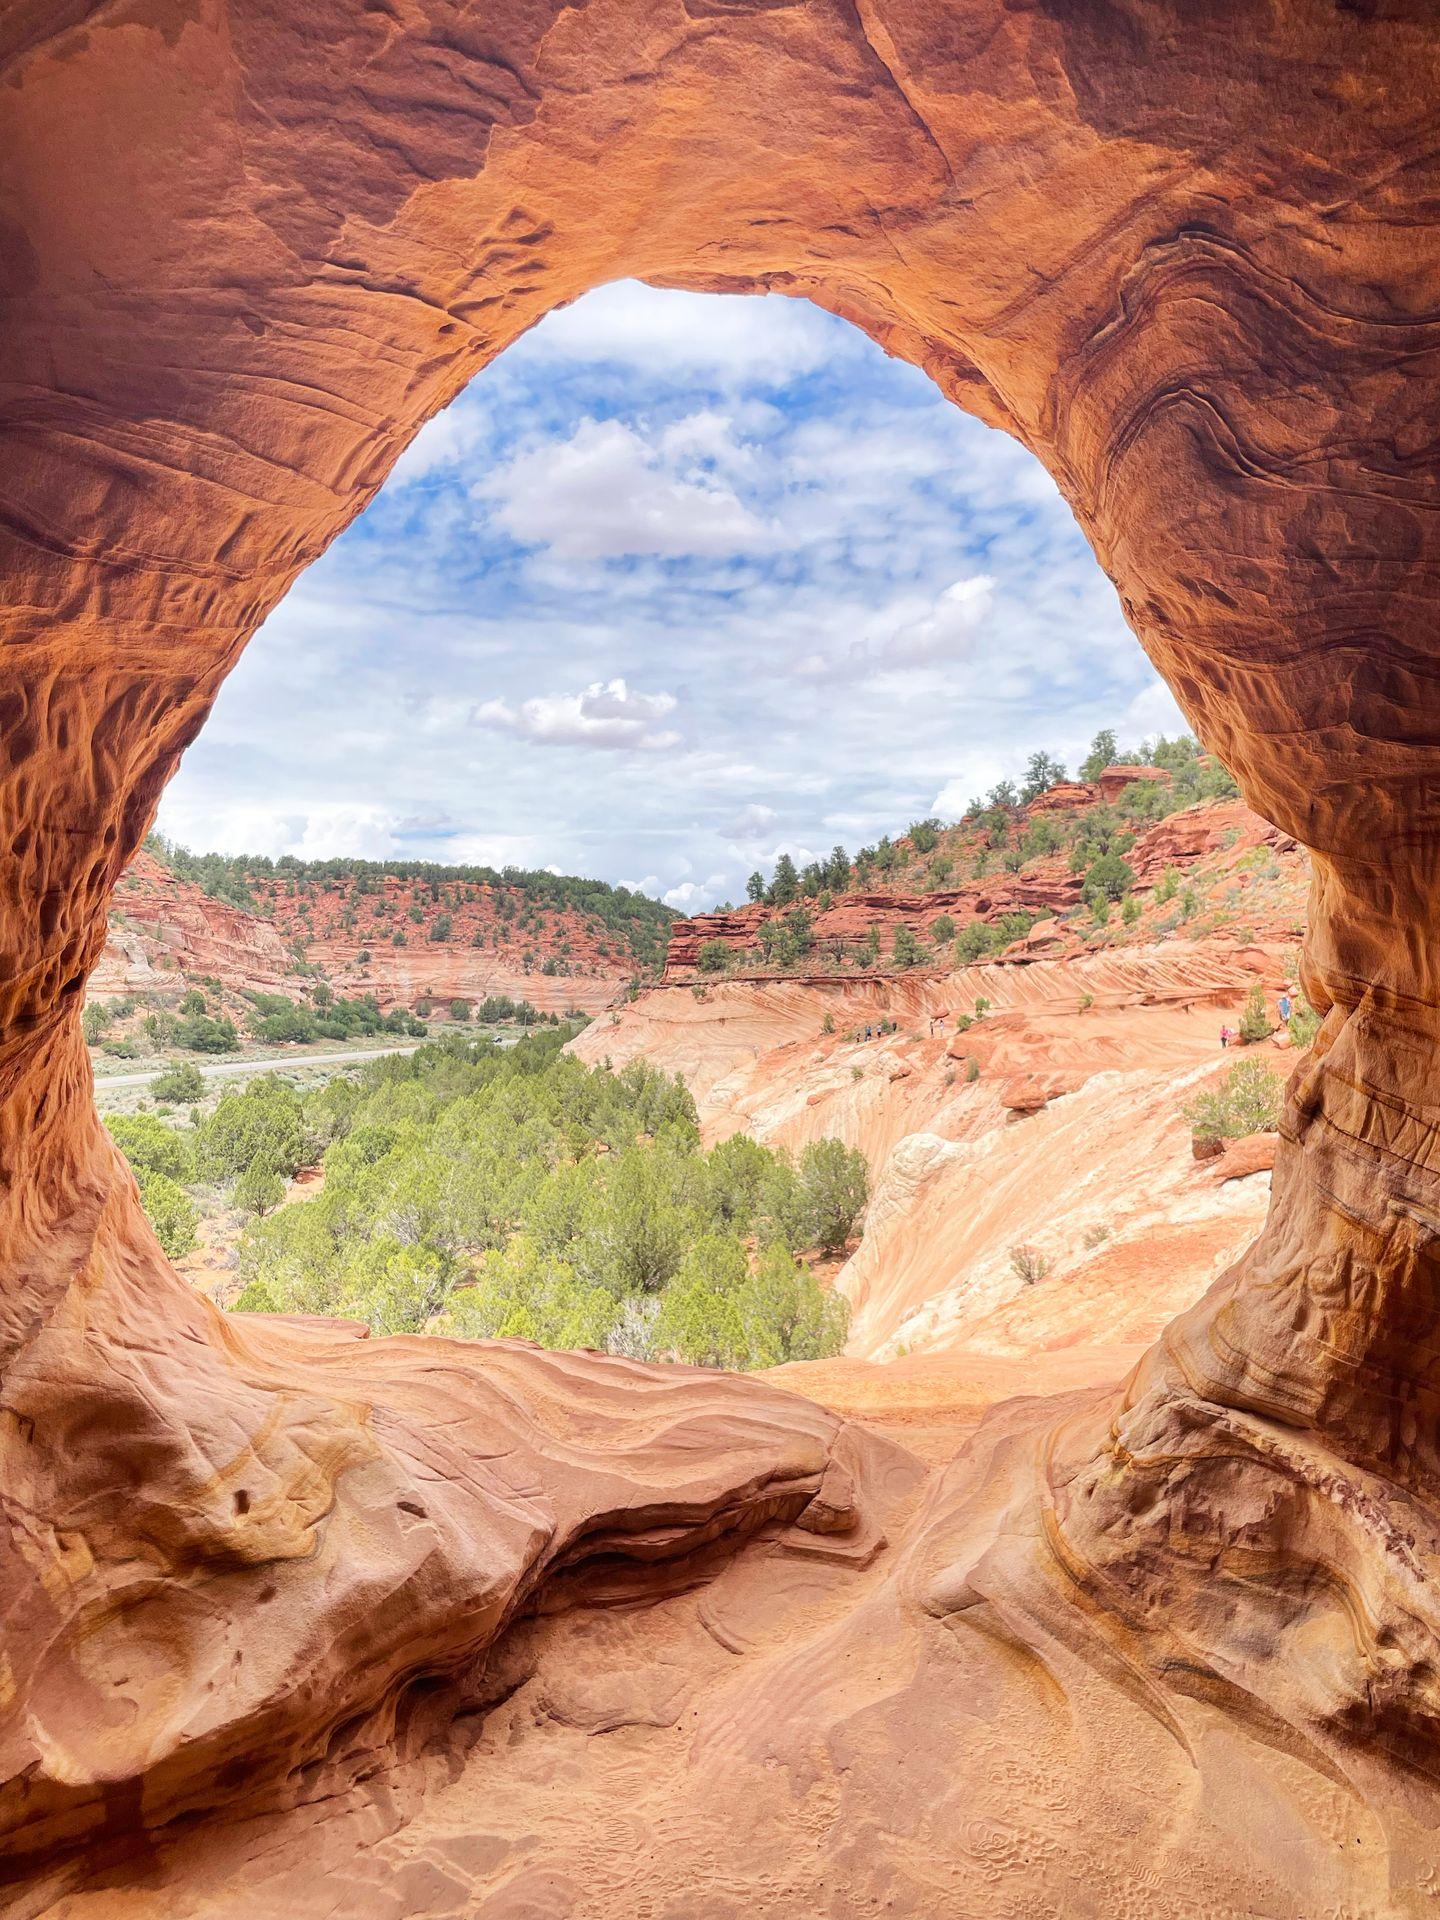 Looking out from a cave at the Kanab Sand Dunes.